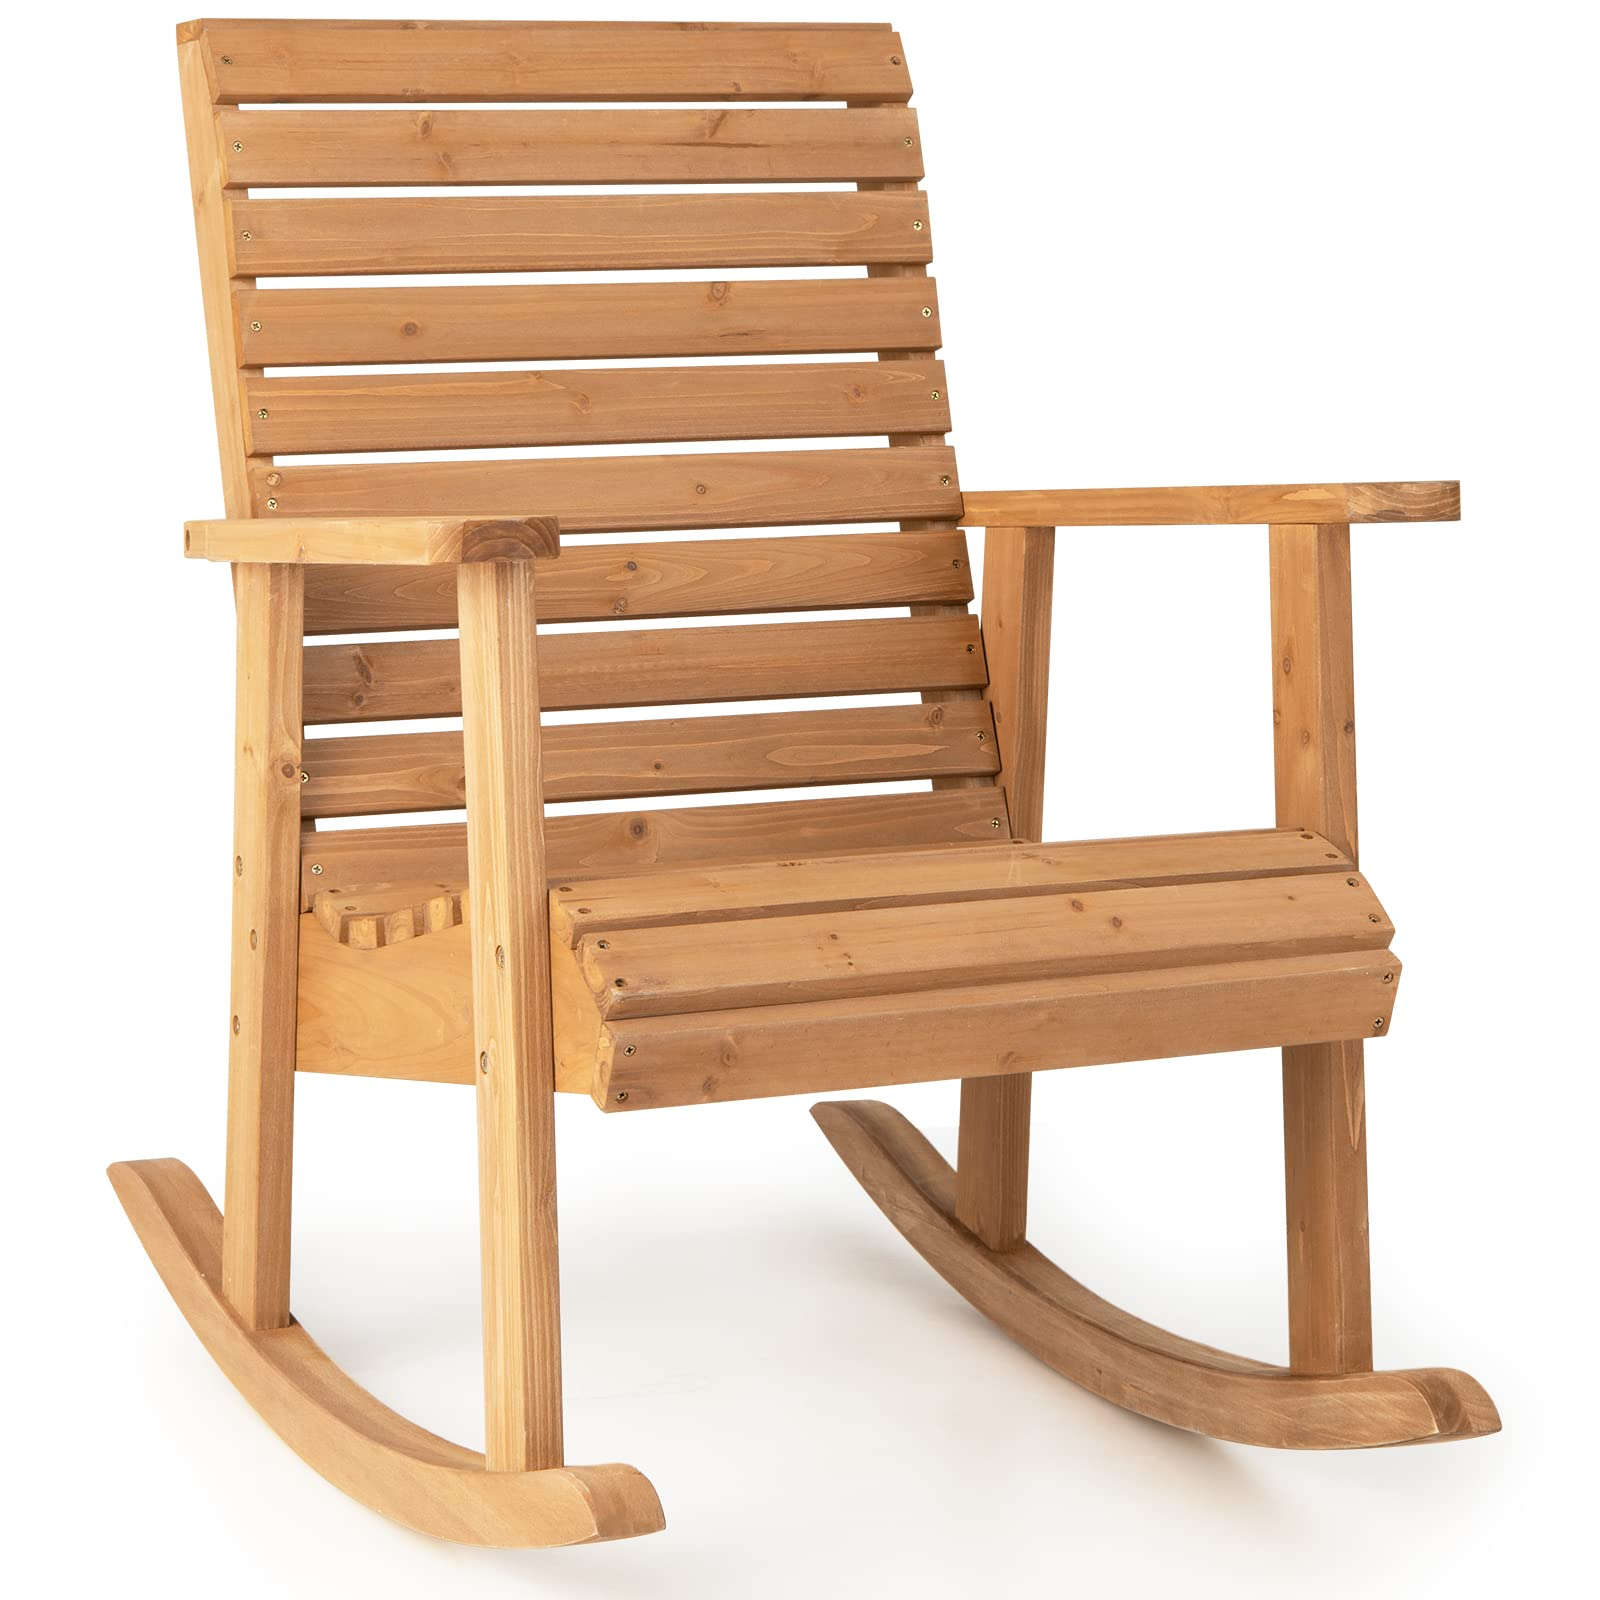 Giantex Wood Rocking Chair Outdoor - Outside Rocker with High Backrest